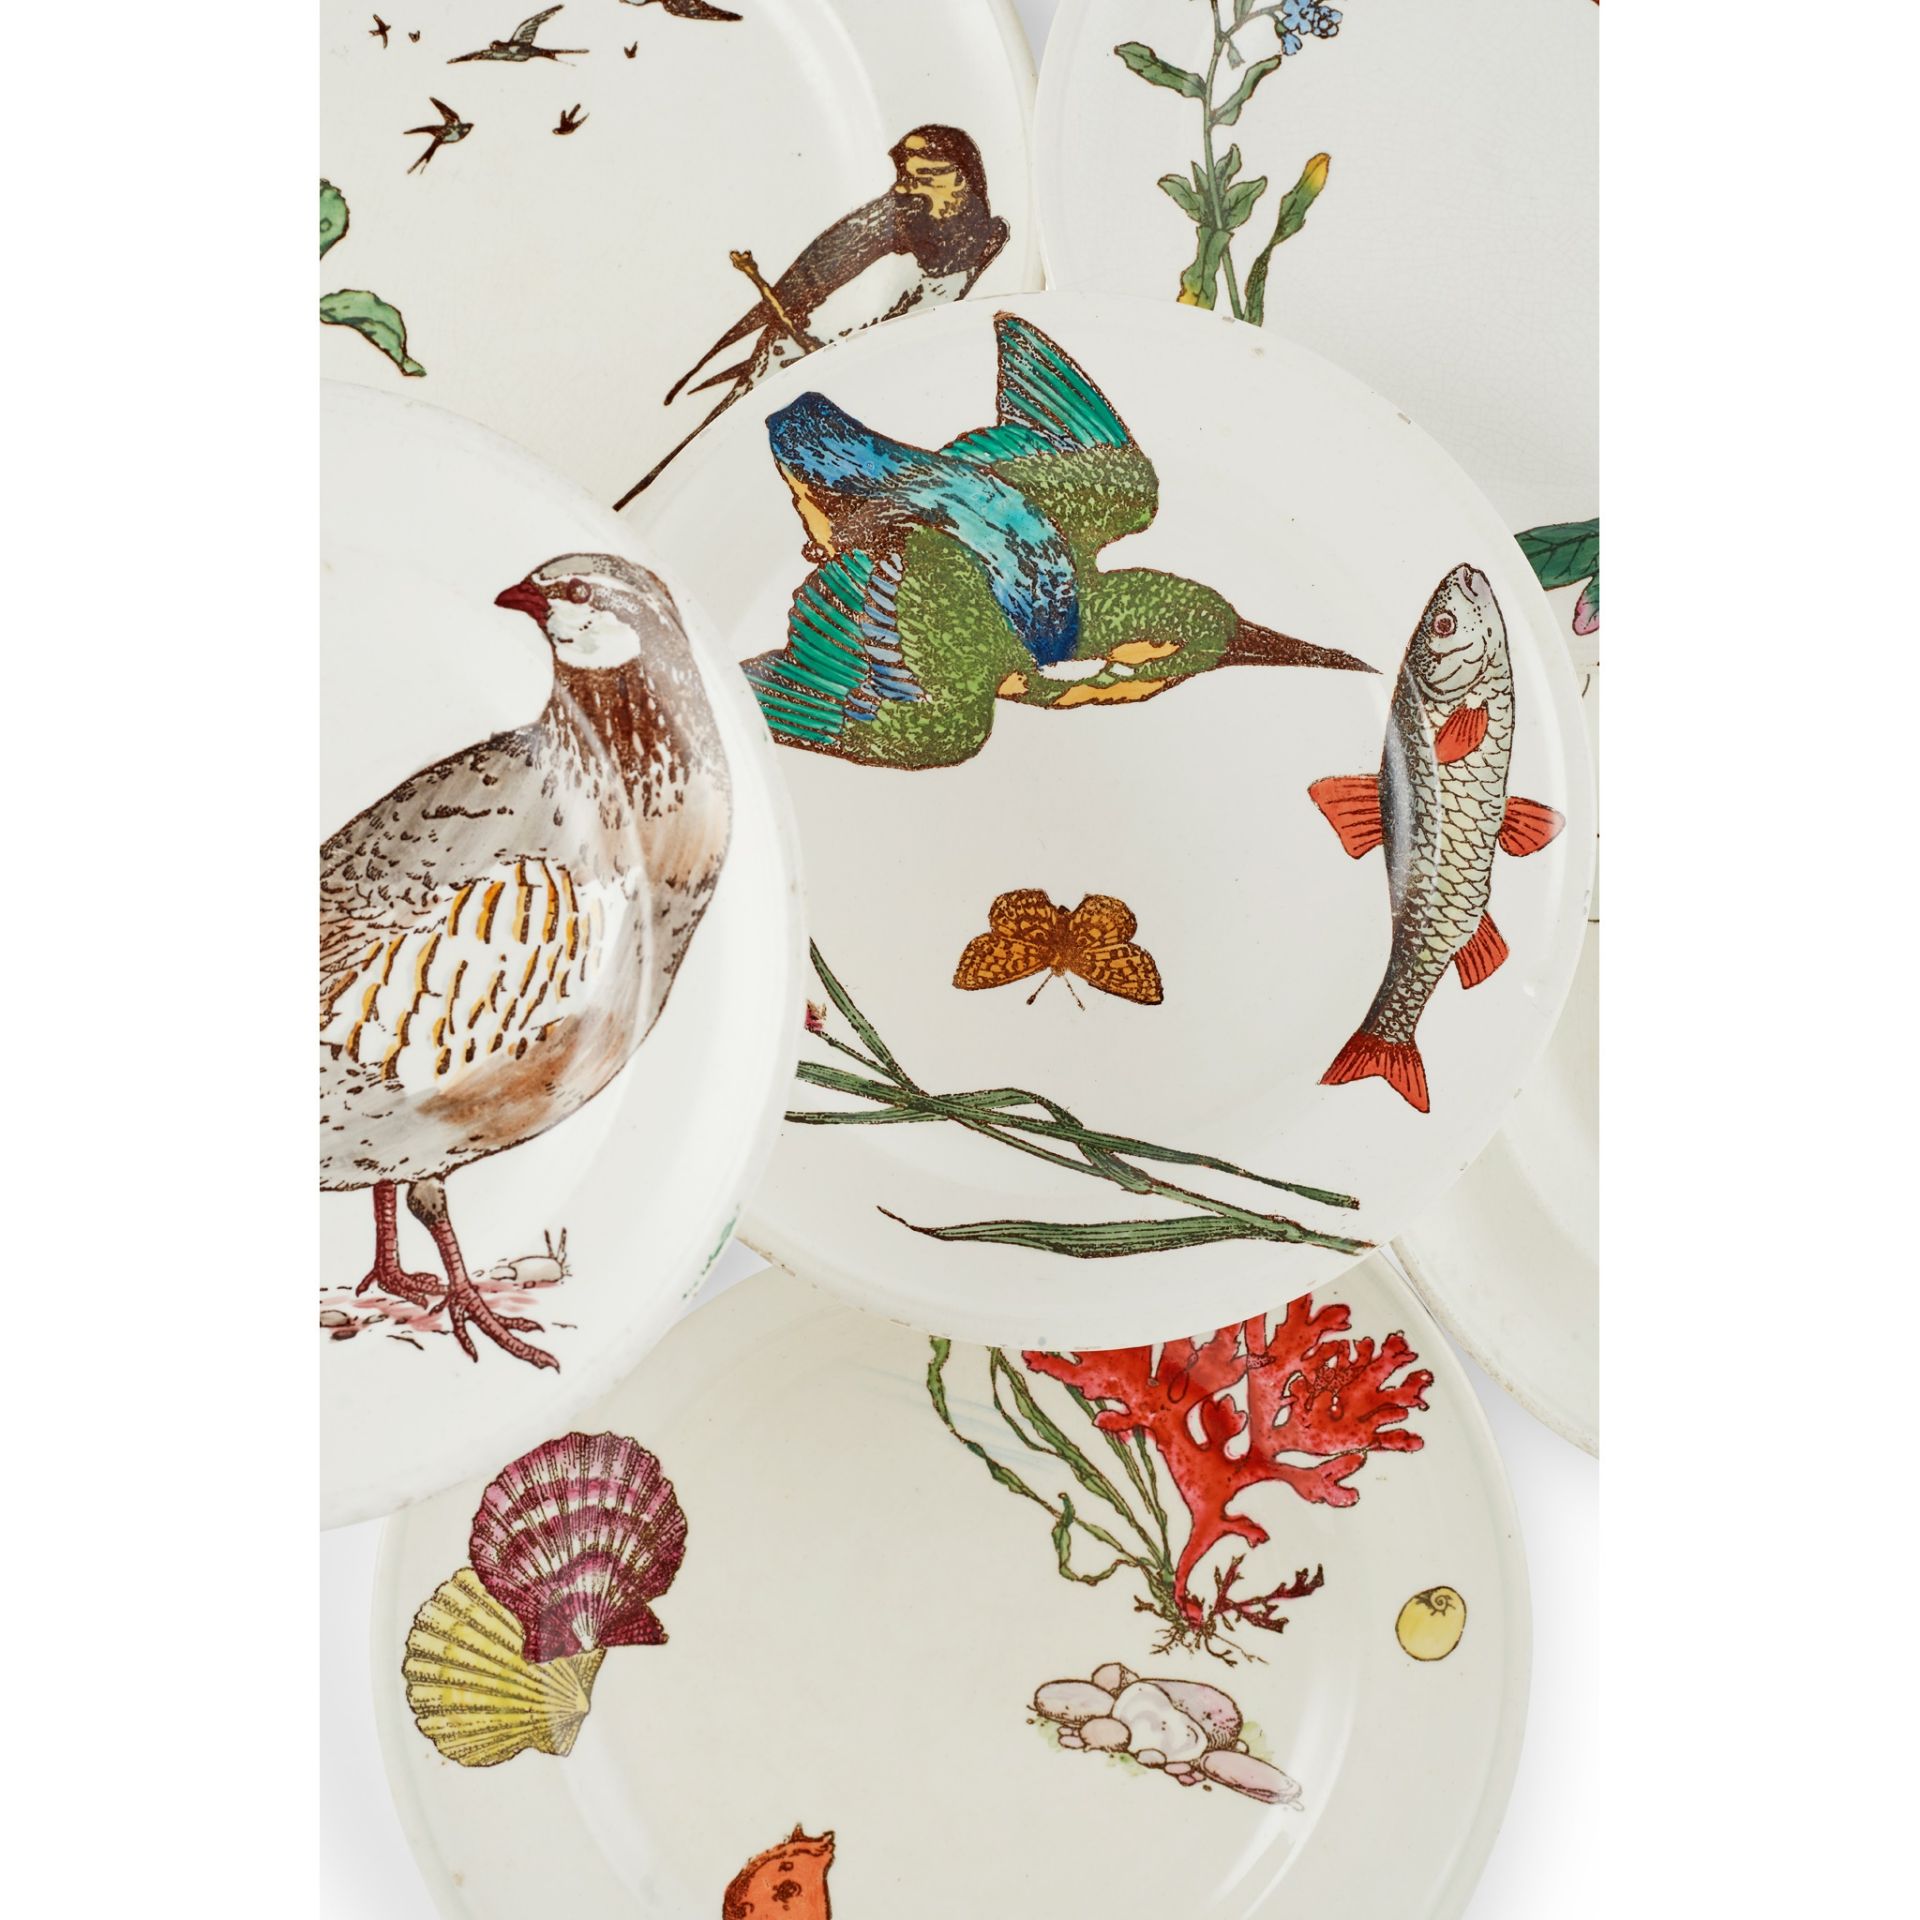 WILLIAM STEPHEN COLEMAN (1829-1904) FOR MINTON & CO. SET OF TEN ‘NATURALIST SERIES’ PLATES, CIRCA - Image 7 of 7